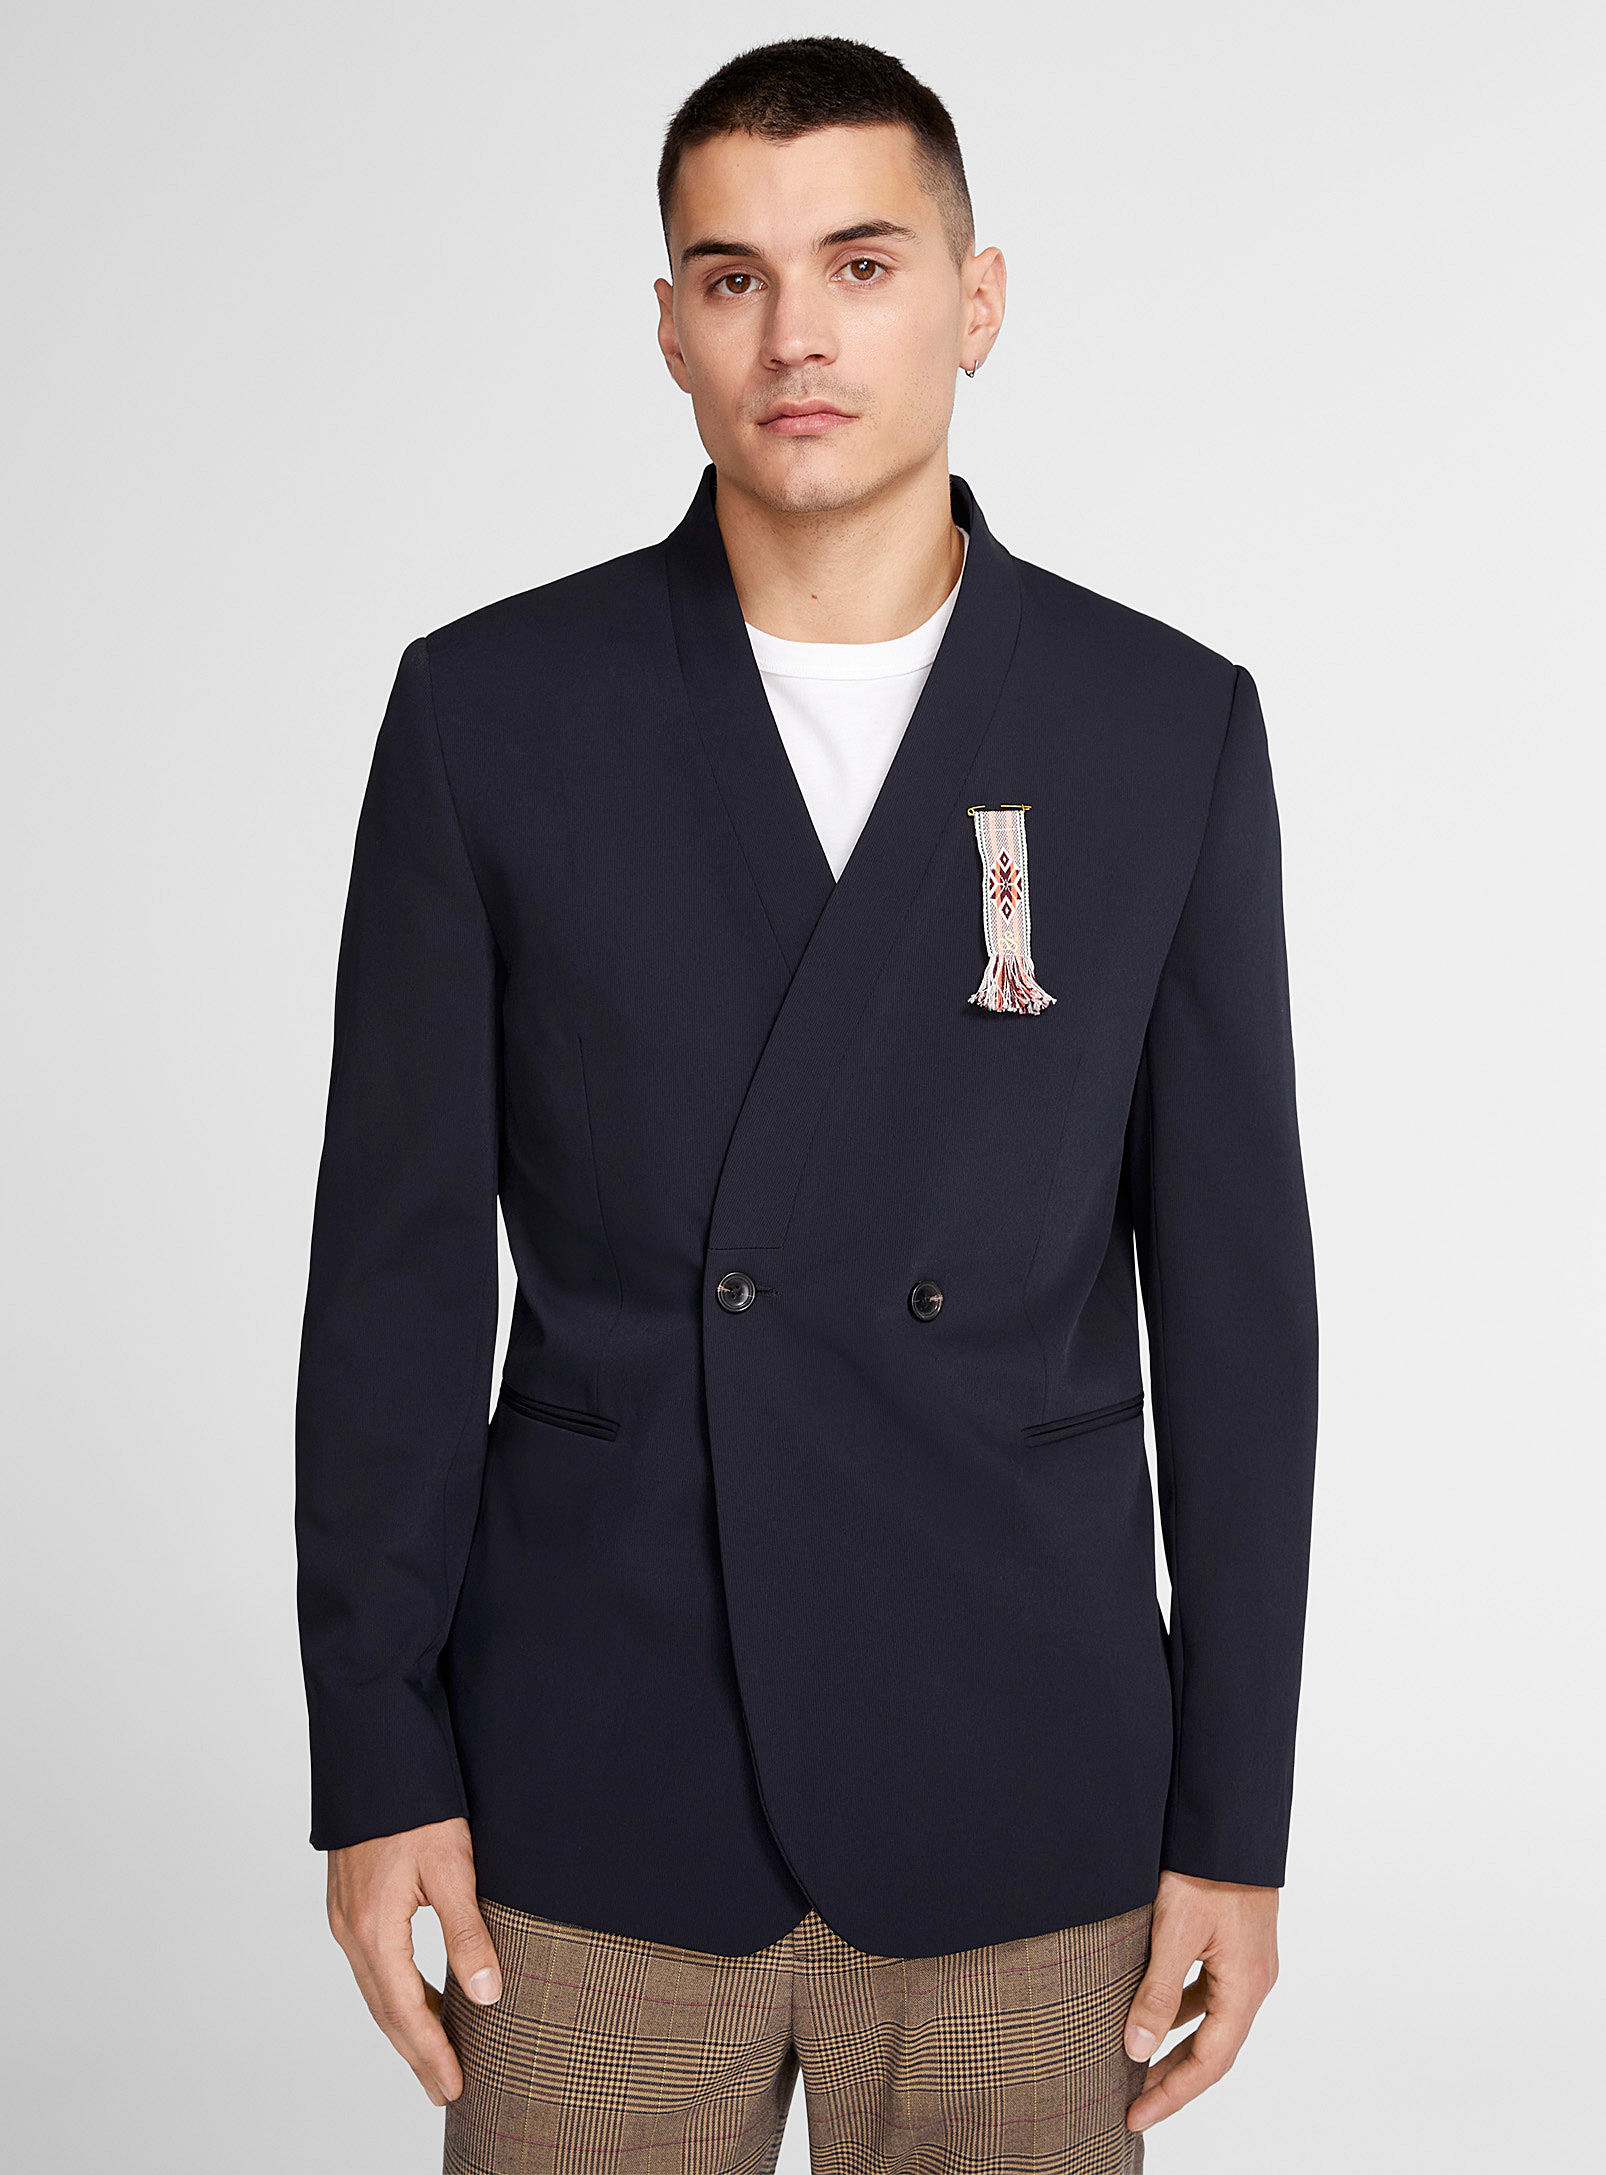 Scotch & Soda - Men's Double-breasted shawl-collar-style jacket